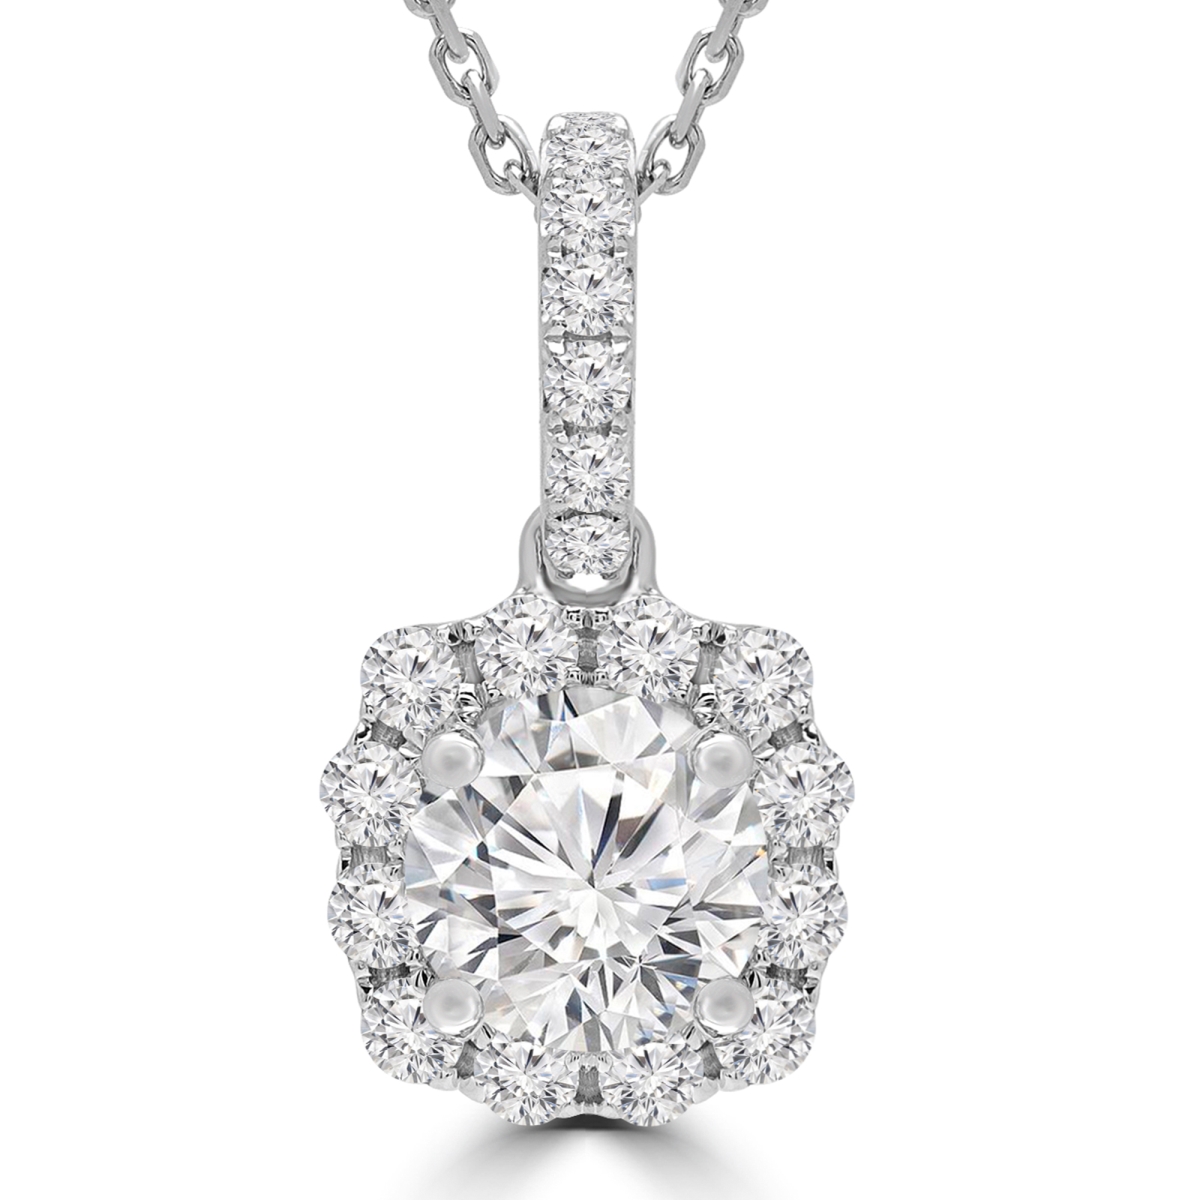 Md190518 1.17 Ctw Round Diamond Cushion Halo Pendant Necklace In 18k White Gold